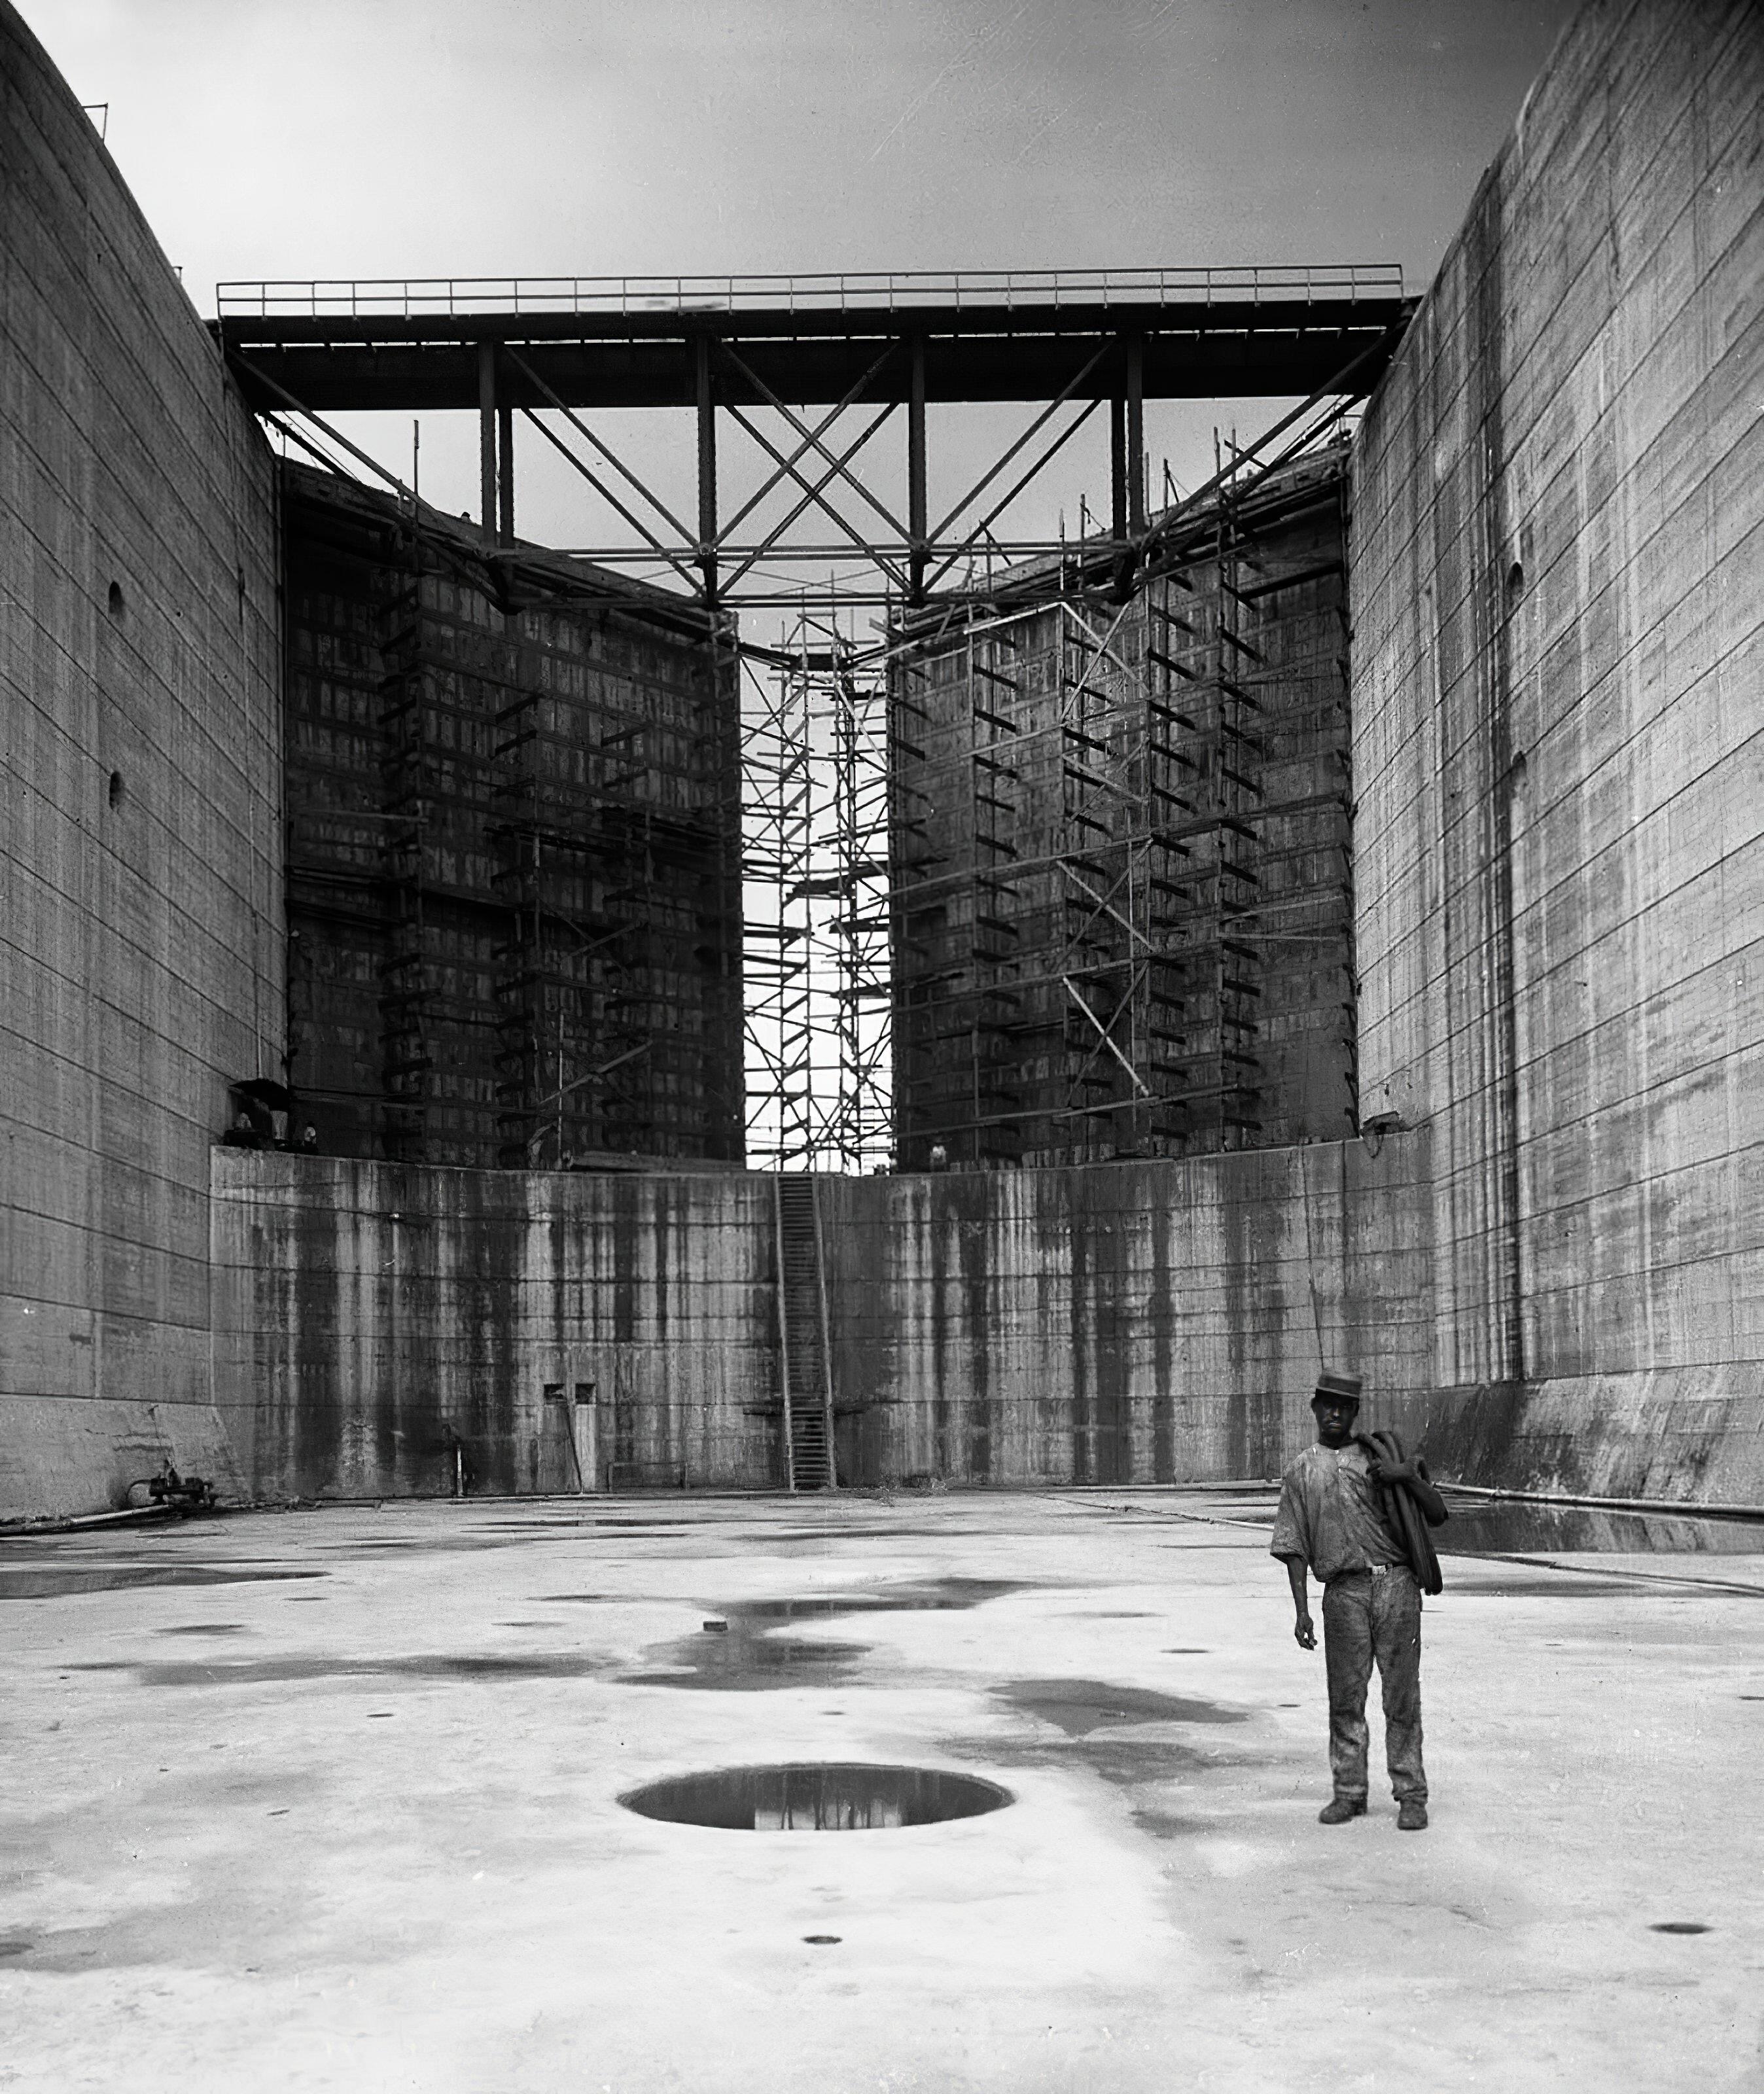 A solitary man standing in a cavernous empty space surrounded by very high walls with scaffolding and a bridge on top